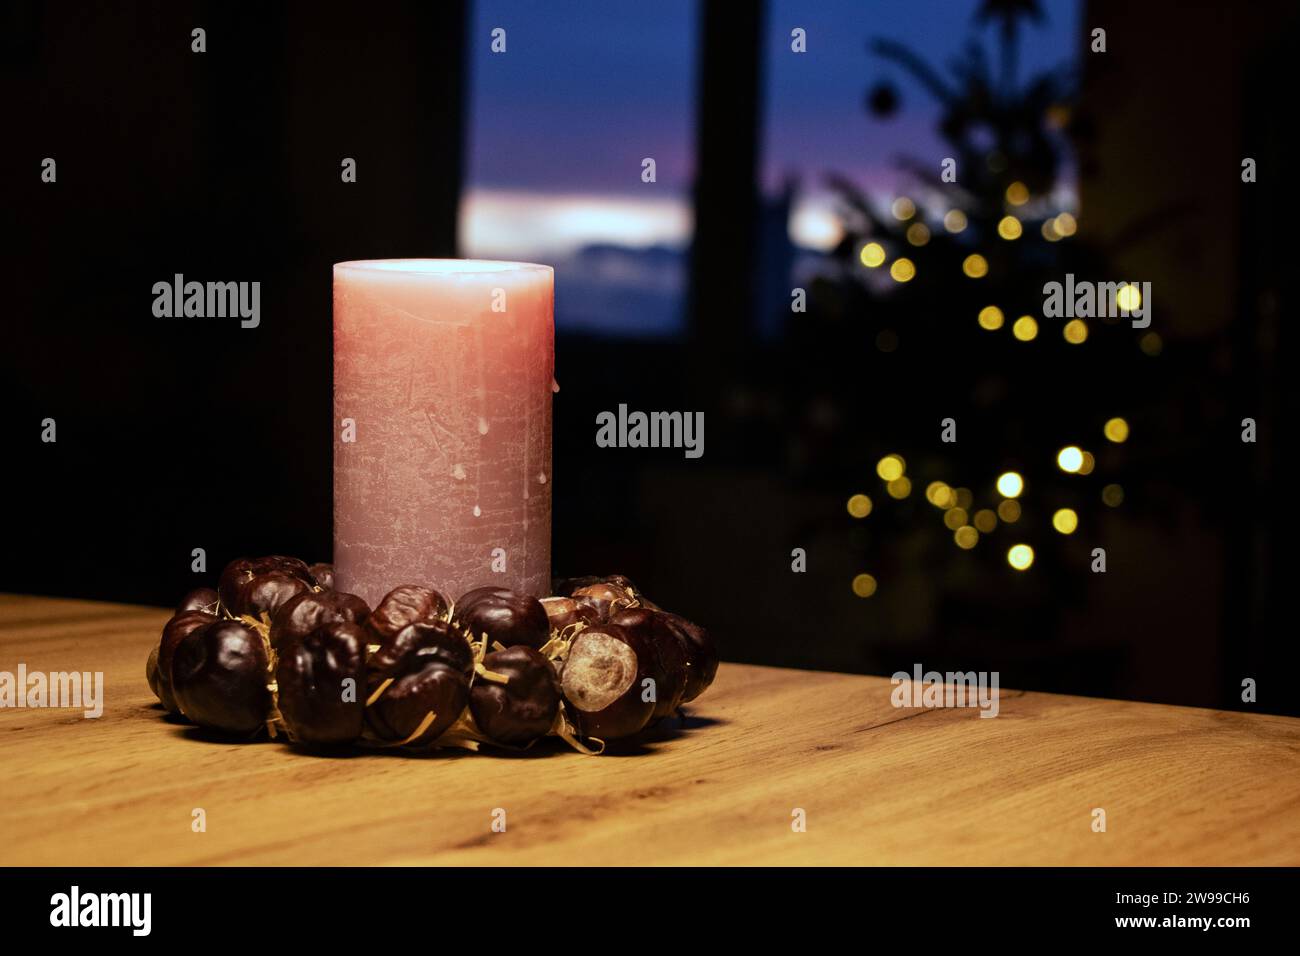 Christmas candle with ring of chestnuts on brown tabel and christmas tree in background near opened window with evening view Stock Photo